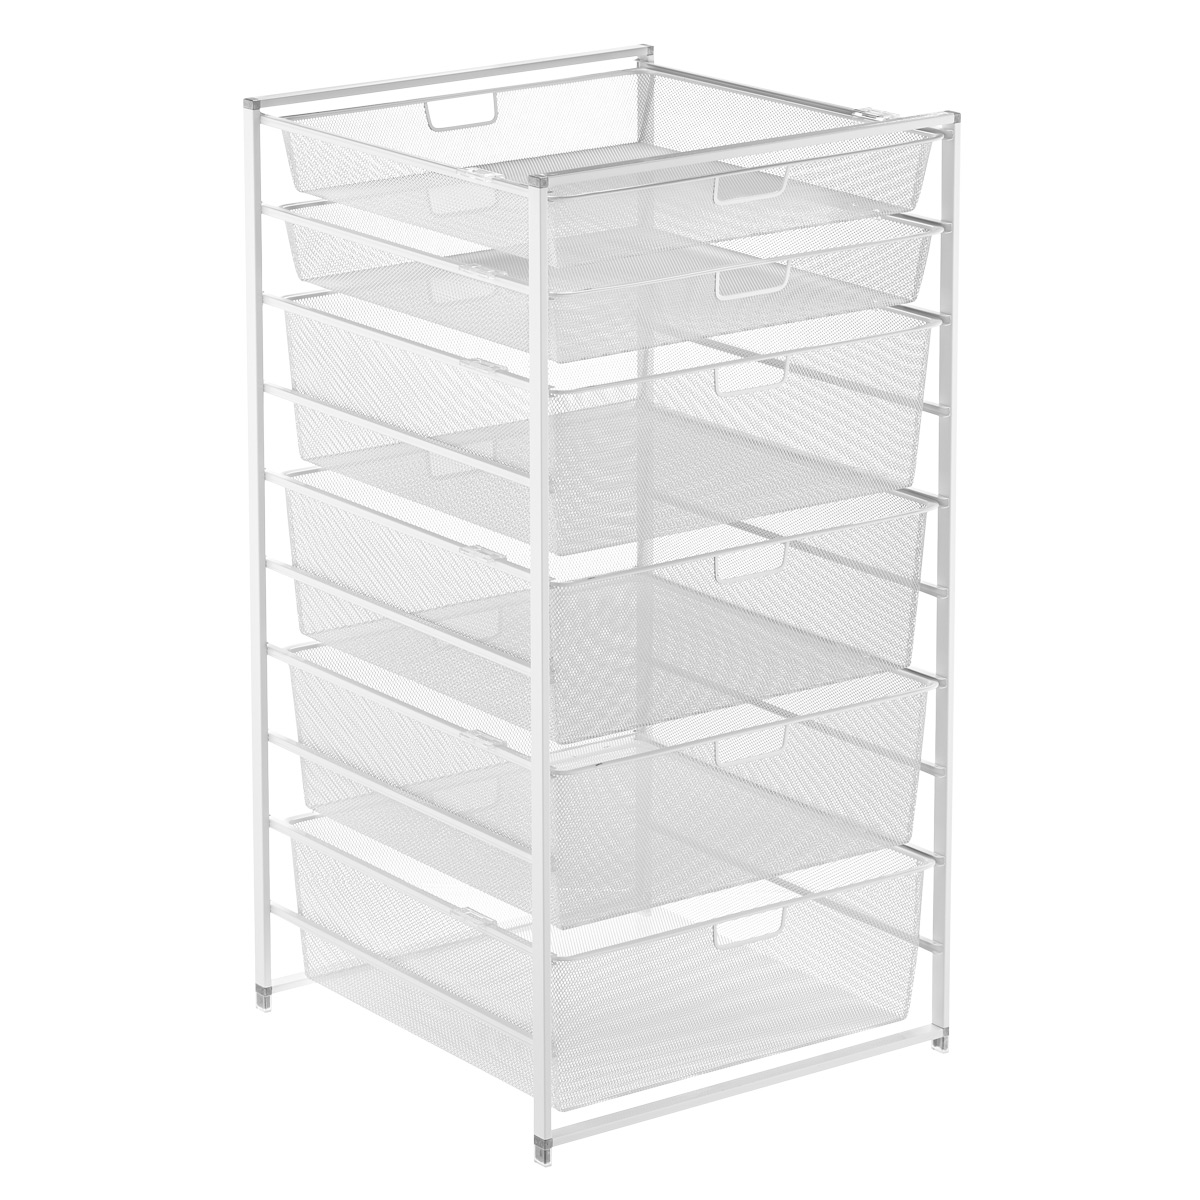 https://www.containerstore.com/catalogimages/418409/10085336_white_wide_10_runner_drawer.jpg